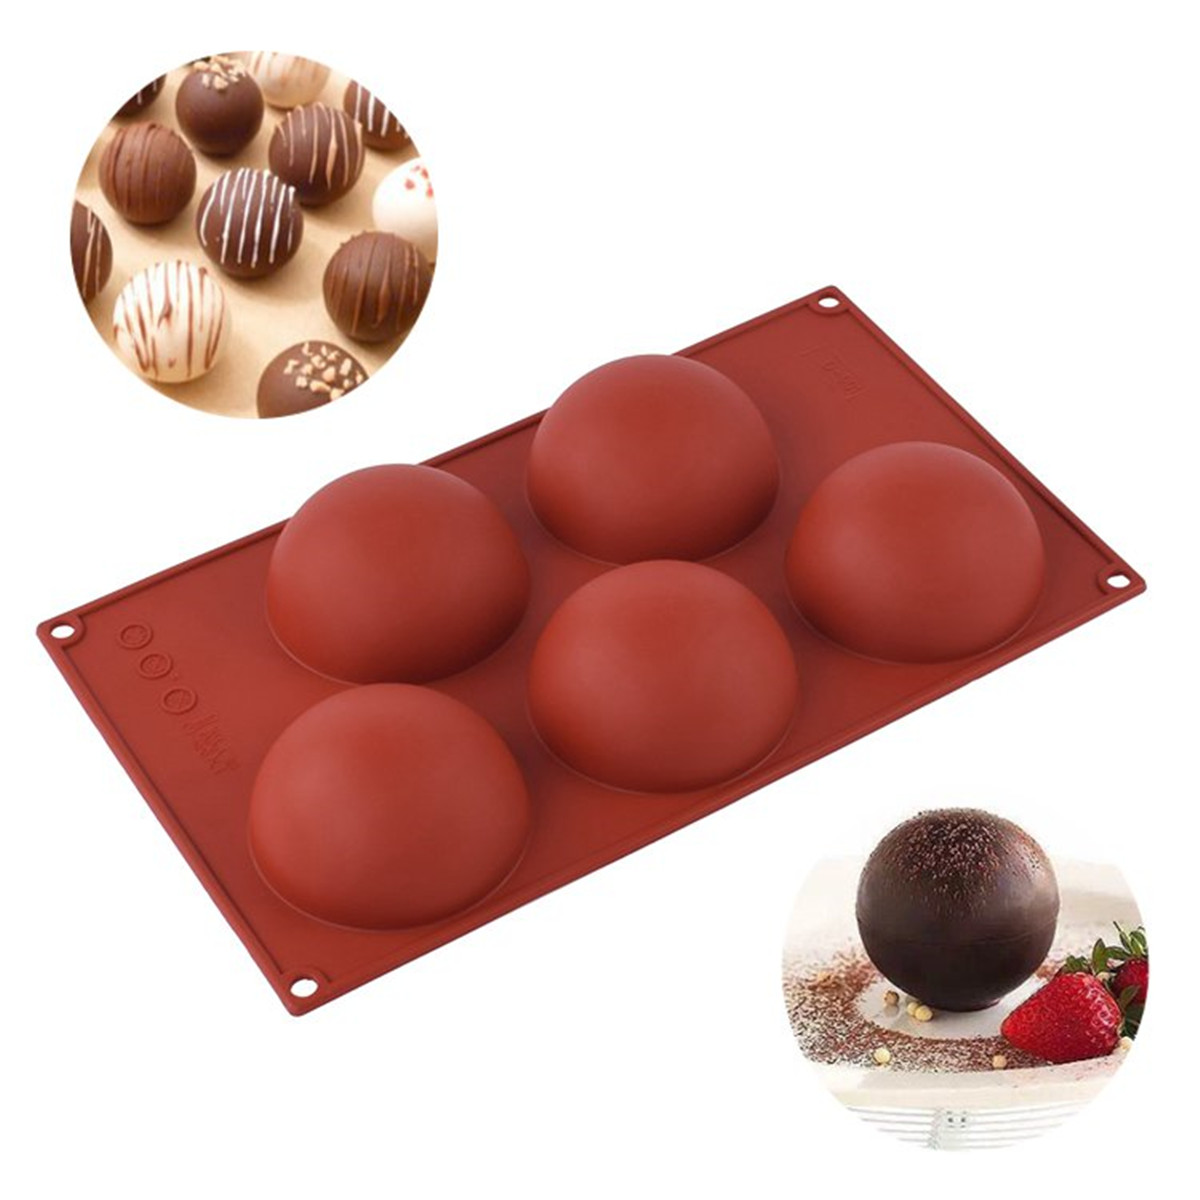 5-Cavity-Silicone-Bread-Cake-Chocolate-Fondant-Mold-Mousse-Pastry-Baking-Tools-1247075-7